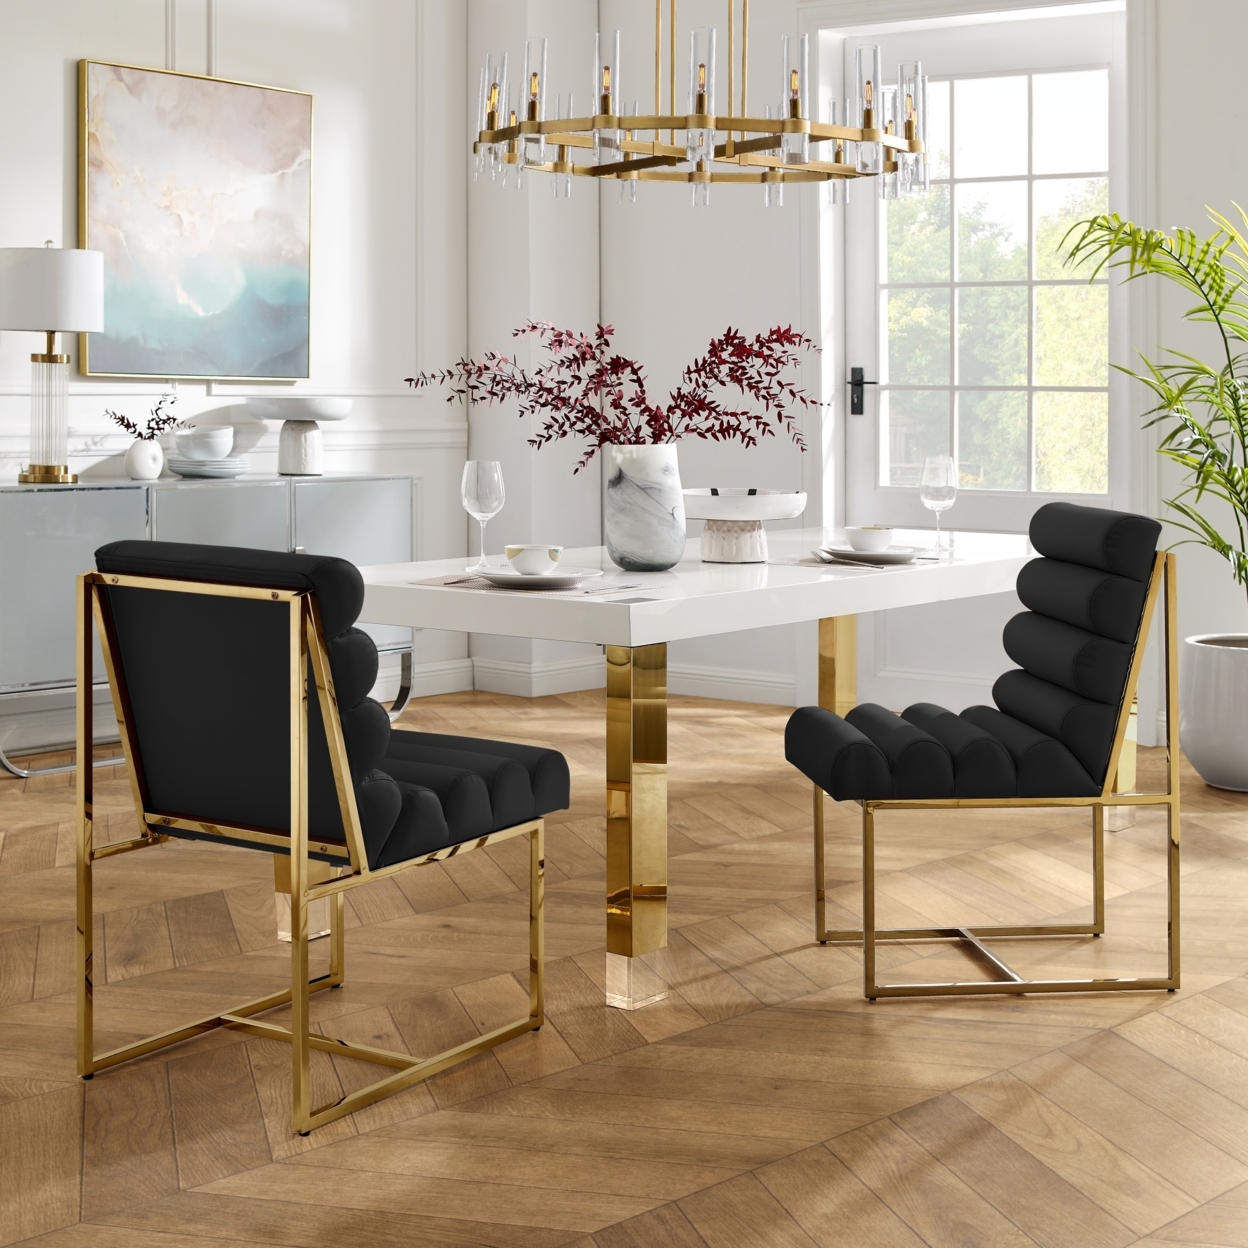 Madelyne Dining Chair - Upholstered, Stainless Steel Frame, Channel Tufted, Armless - Pu Leather Black/gold